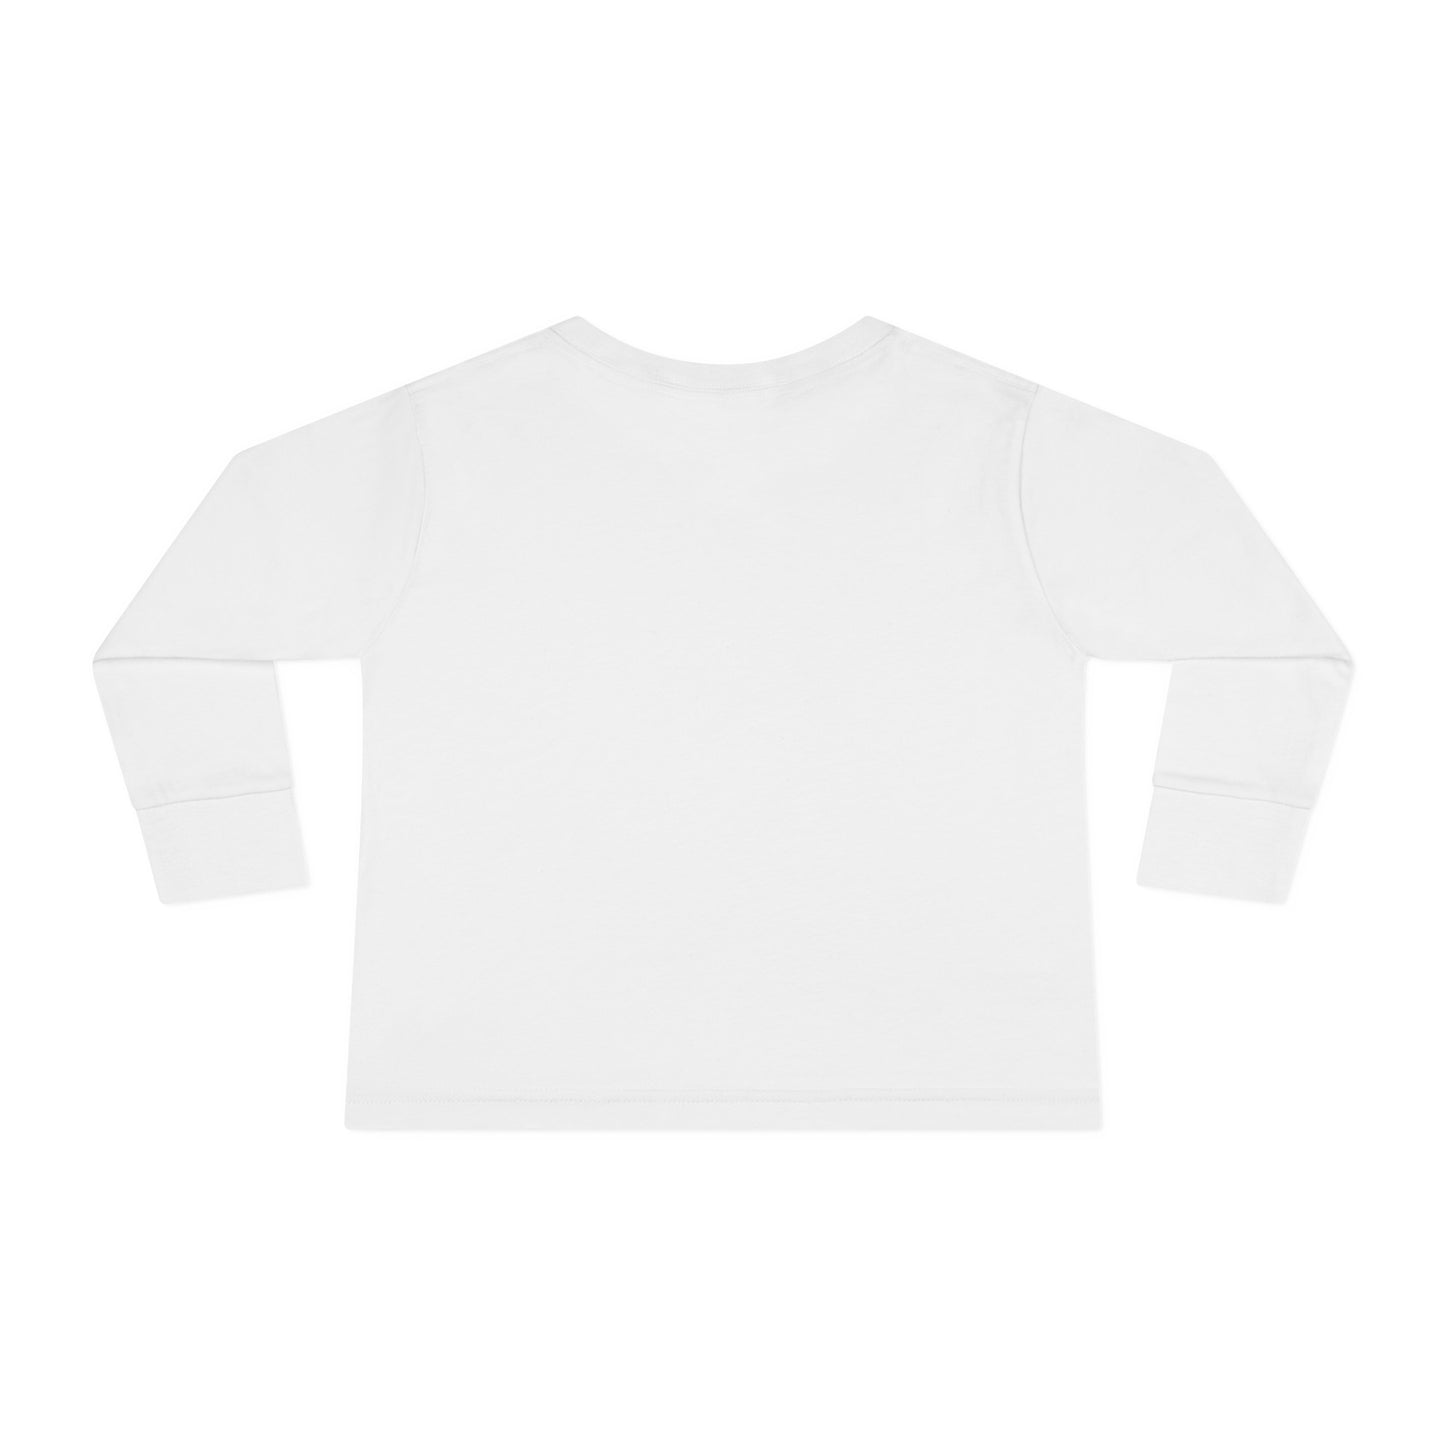 WHITE ALTER YOUR TIRE LEVEL TODDLER LONG SLEEVE LOGOED